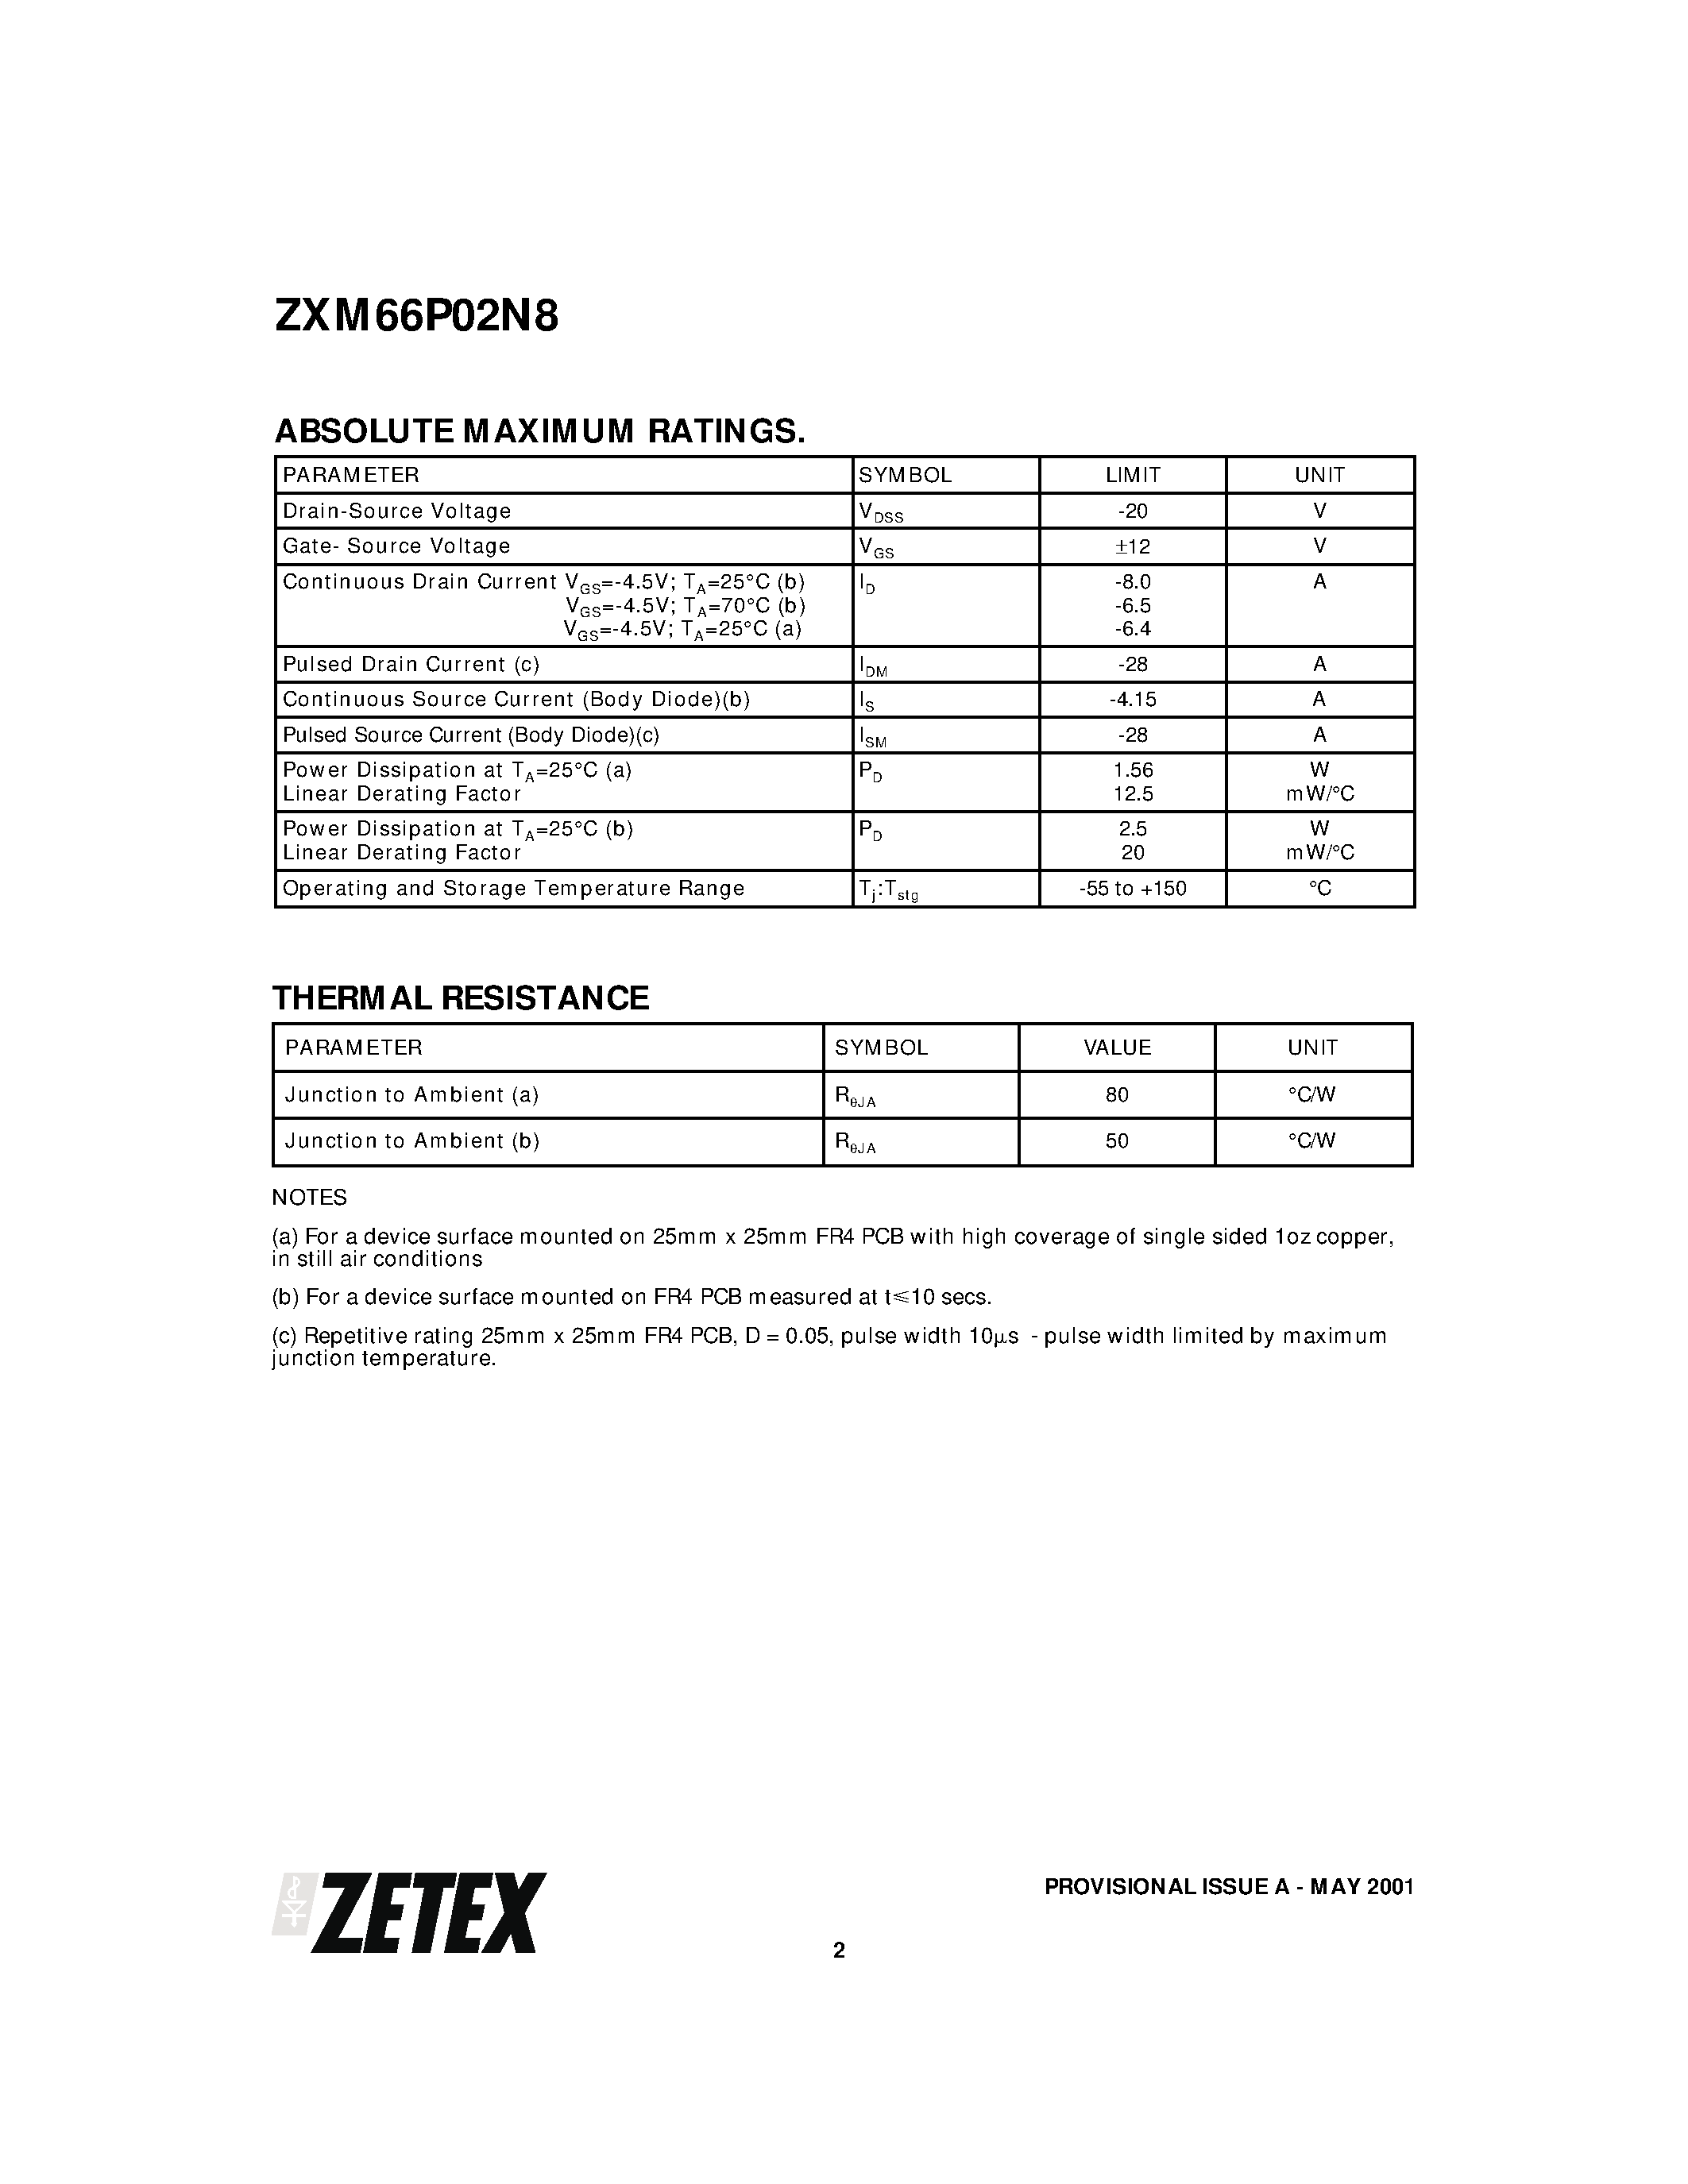 Datasheet ZXM66P02N8 - 20V P-CHANNEL ENHANCEMENT MODE MOSFET page 2